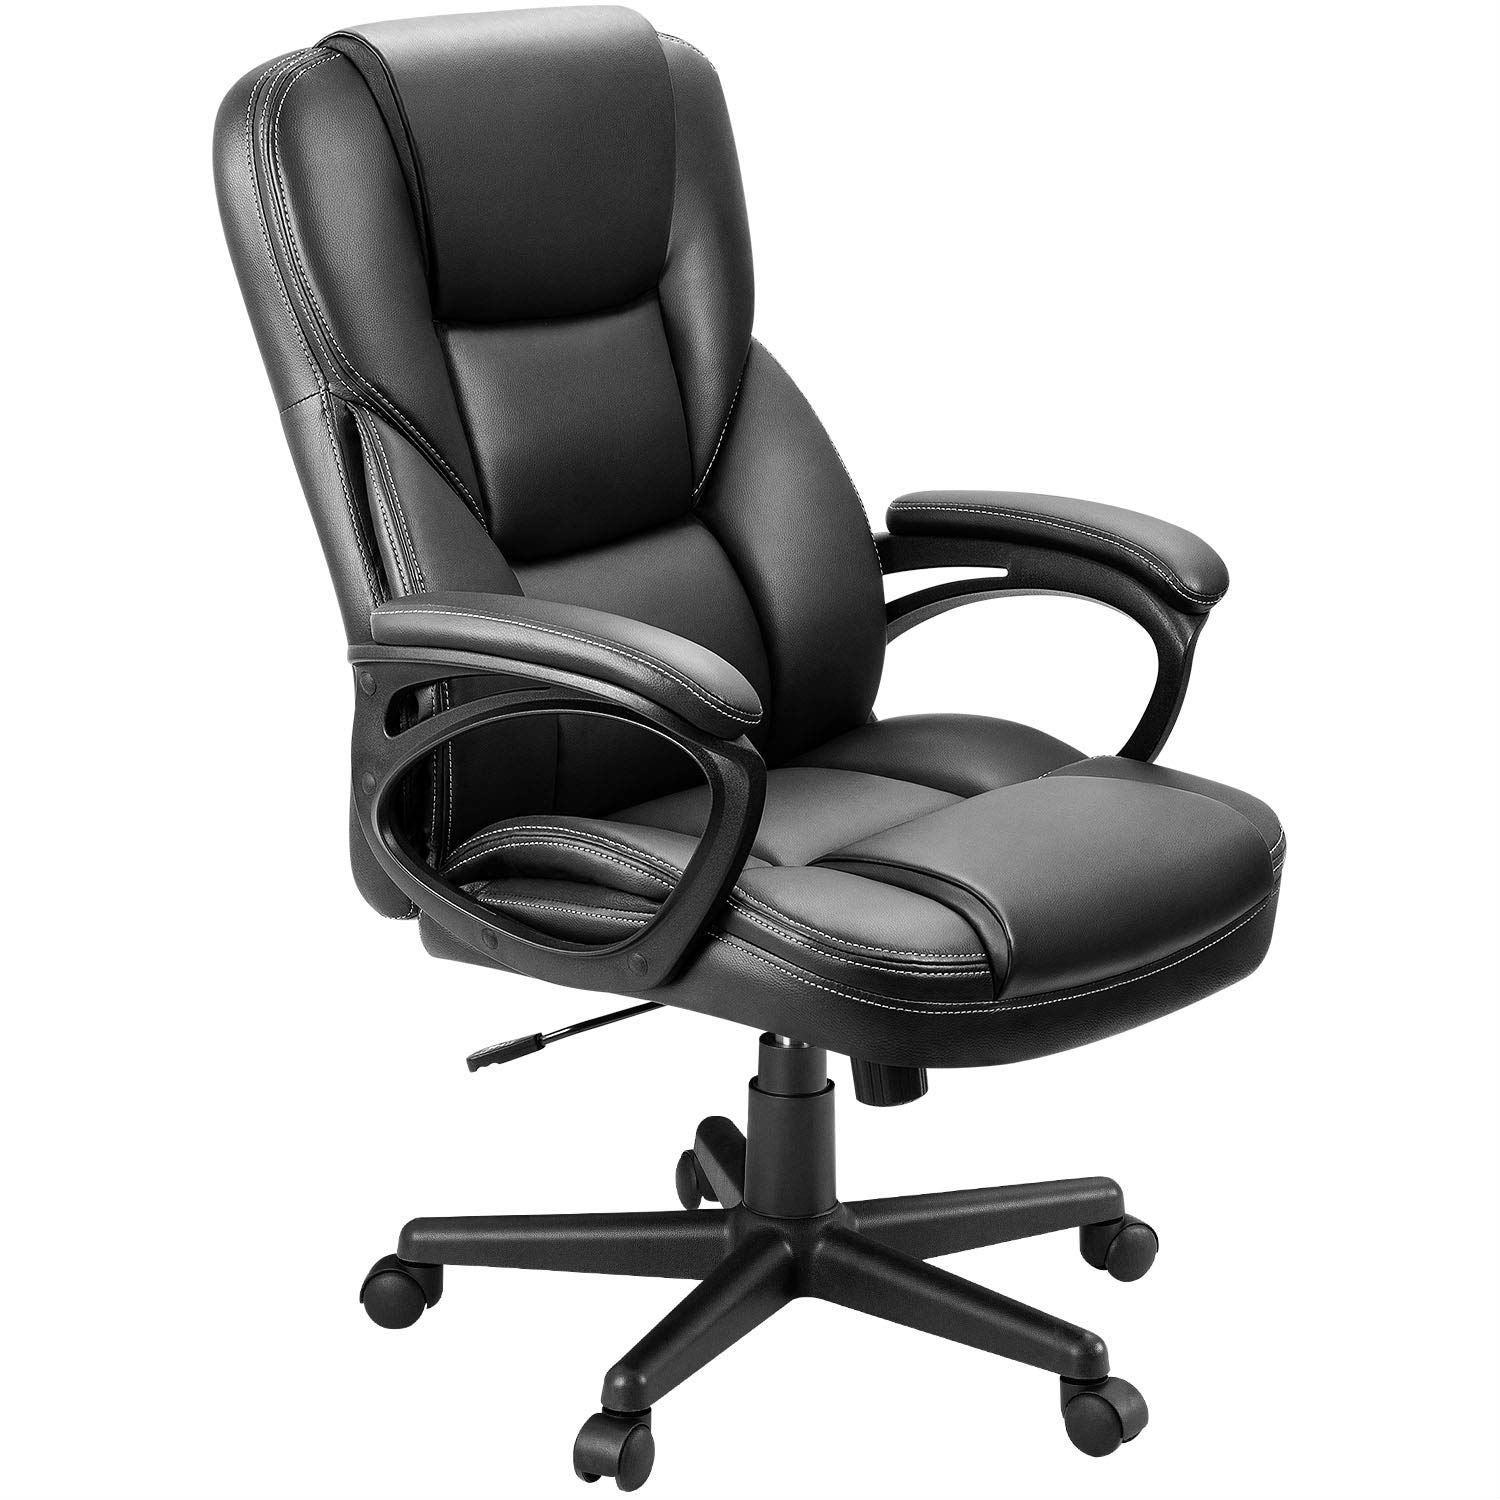 https://ak1.ostkcdn.com/images/products/is/images/direct/08e903f0e3550b90f879acdda59fb99914d165cb/Homall-Office-Desk-Chair-High-Back-Exectuive-Ergonomic-Computer-Chair.jpg